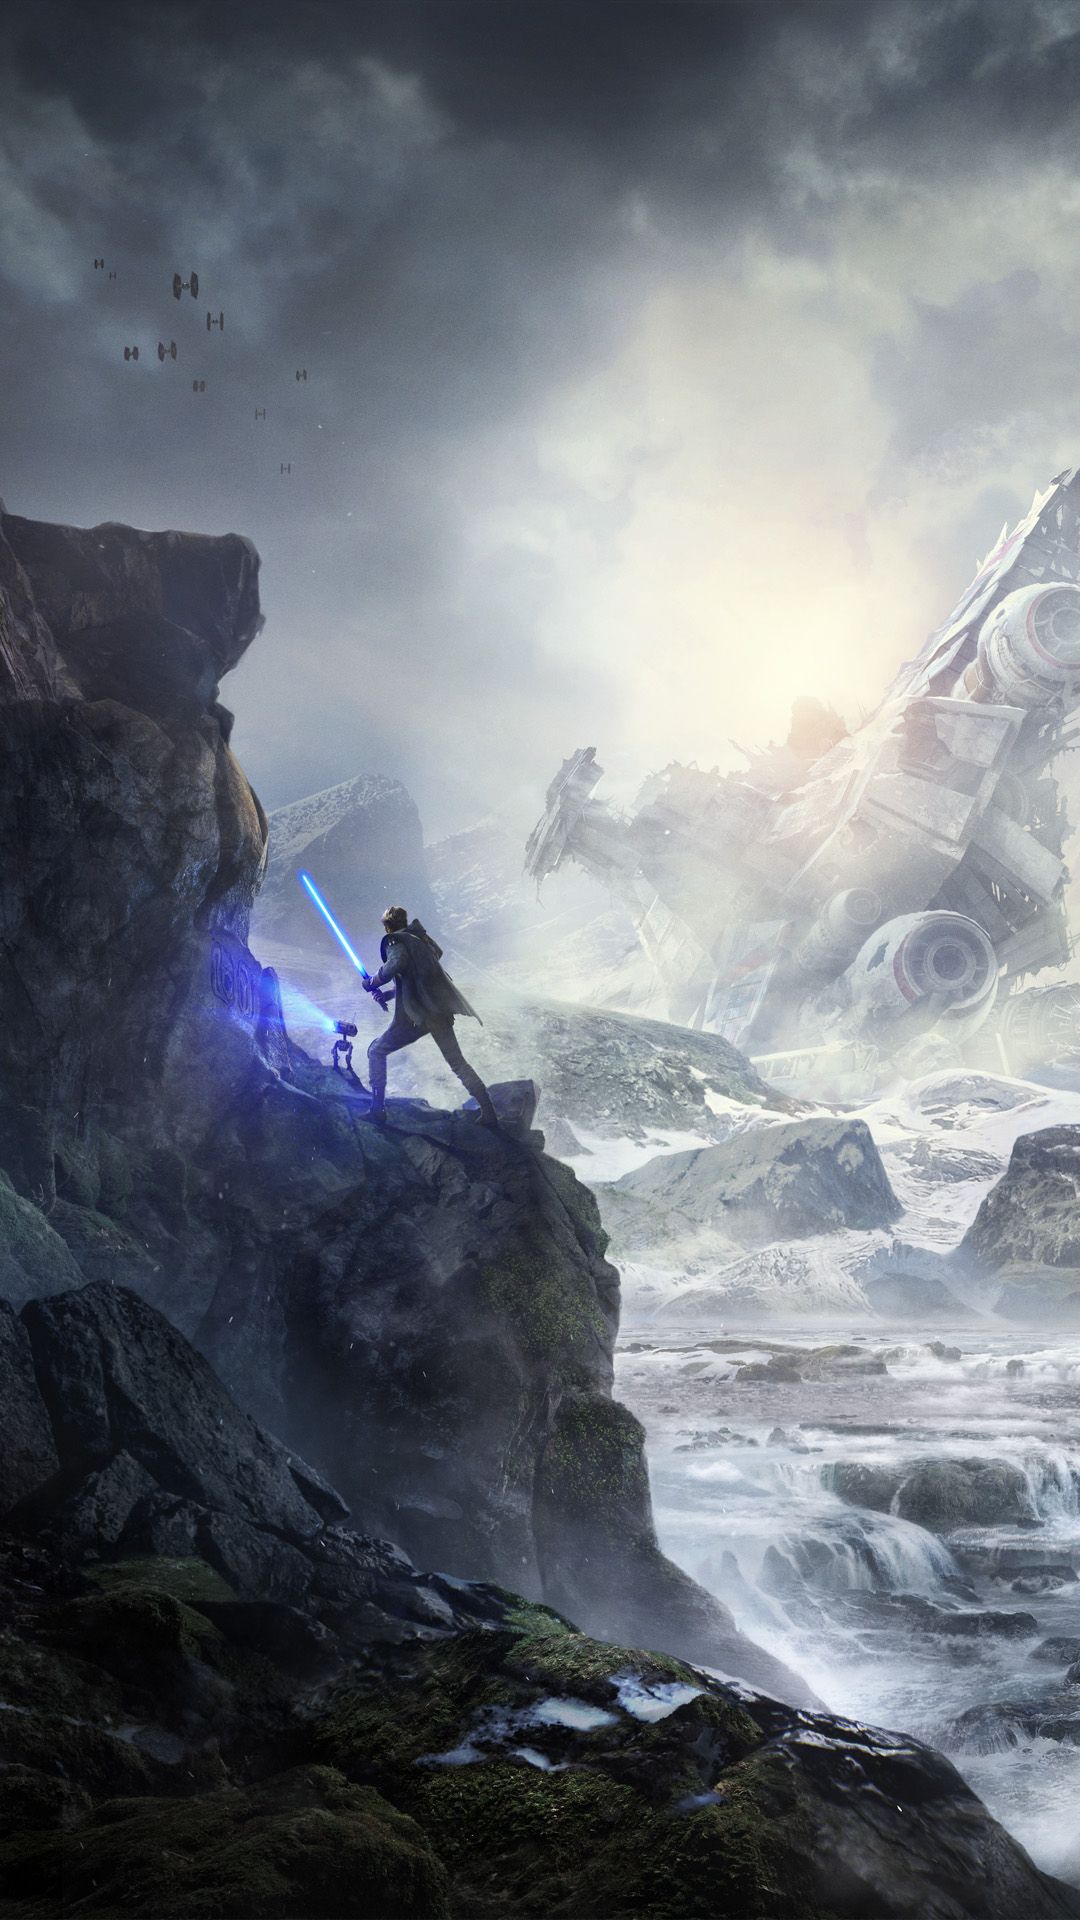 Star Wars Jedi: Fallen Order™- Trailers and Media Official Site